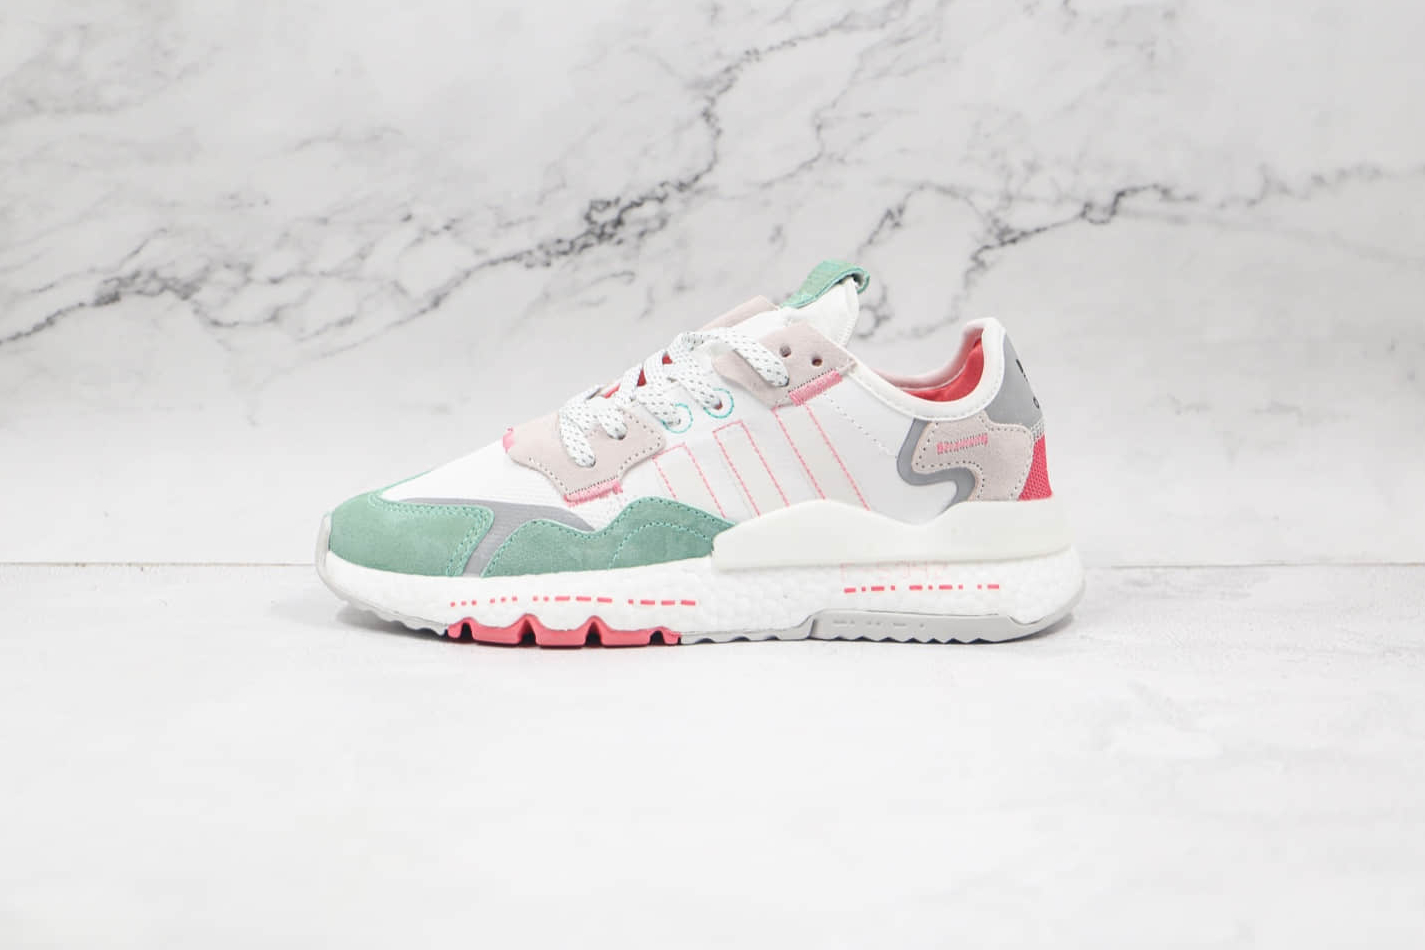 Adidas Nite Jogger 2019 Boost Cloud White Grey Green HO3251 - Latest Release with Exceptional Boost Technology